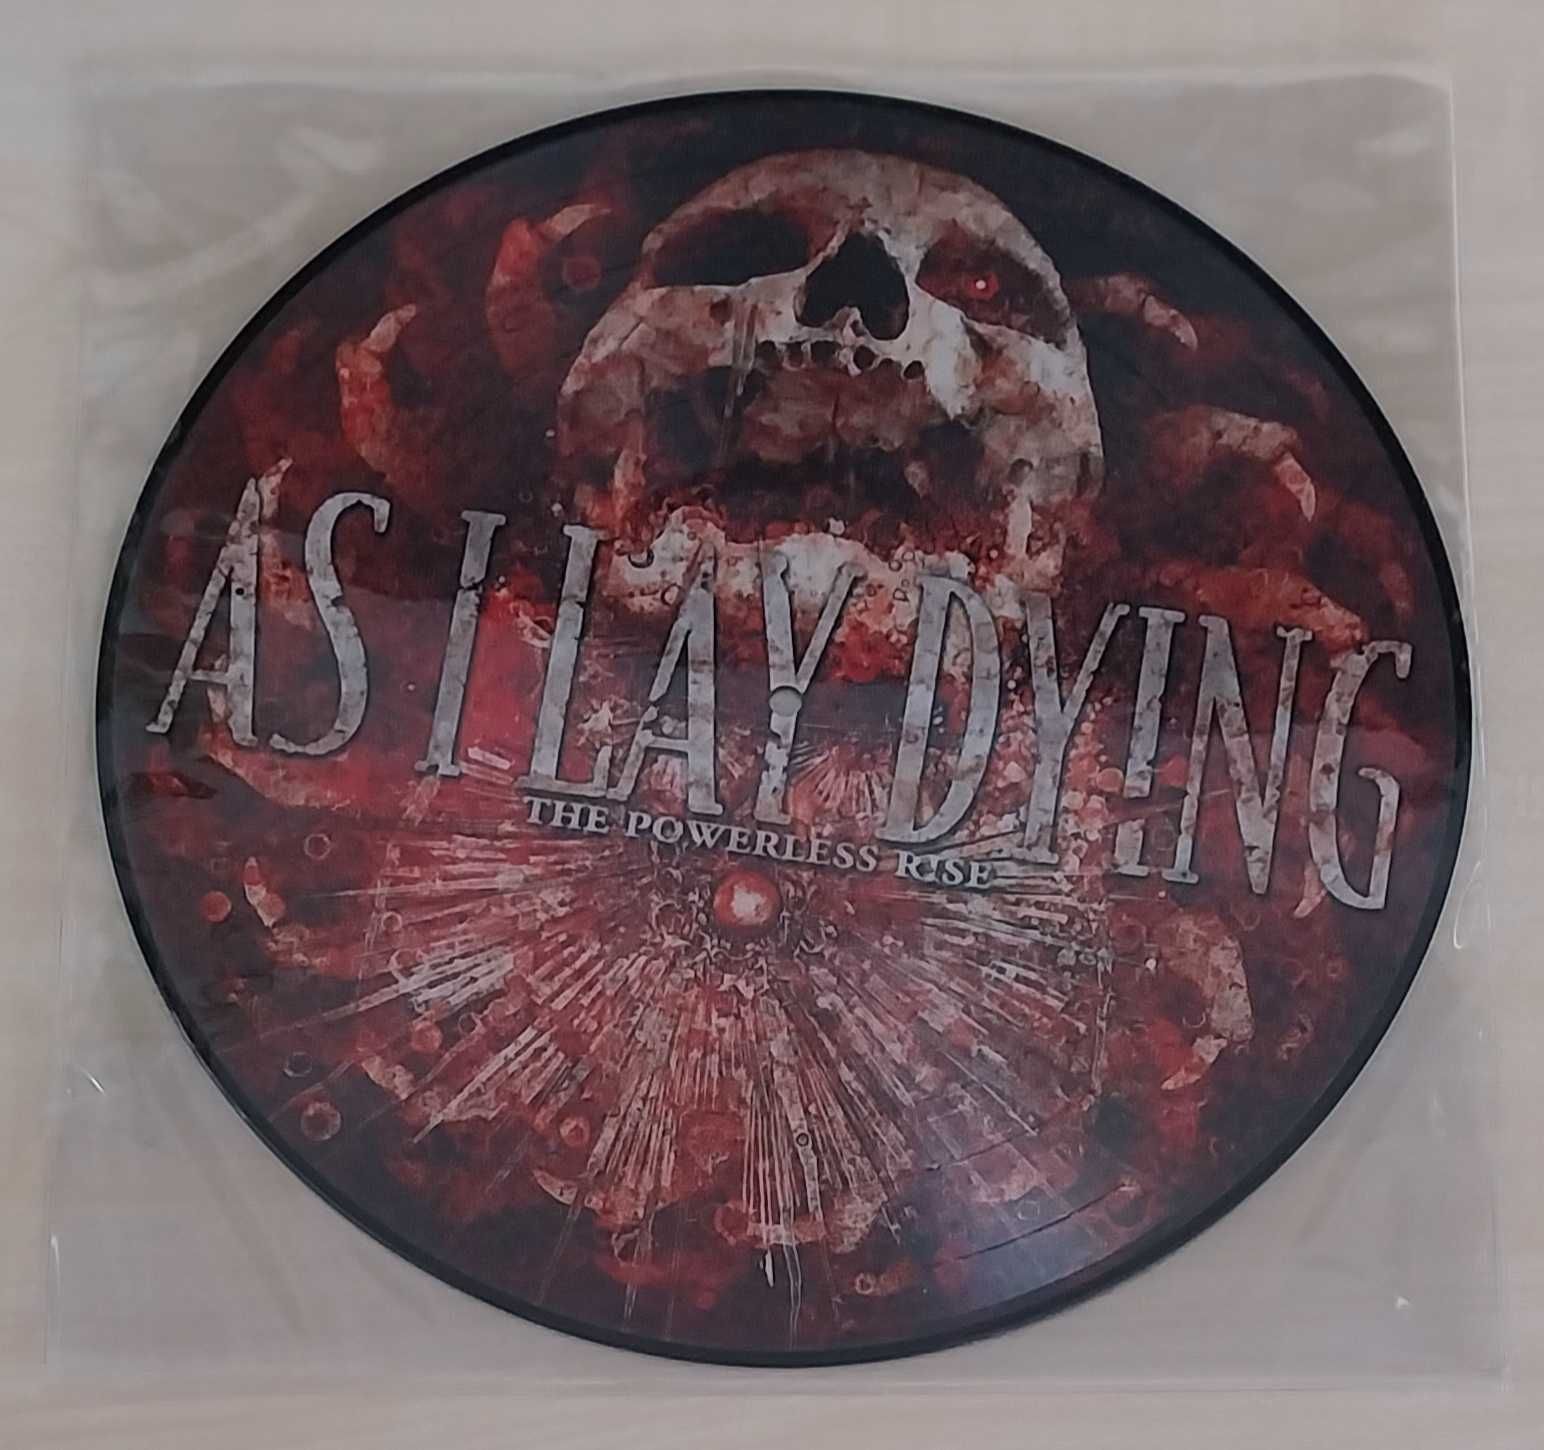 The Powerless Rise - As I Lay Dying LP